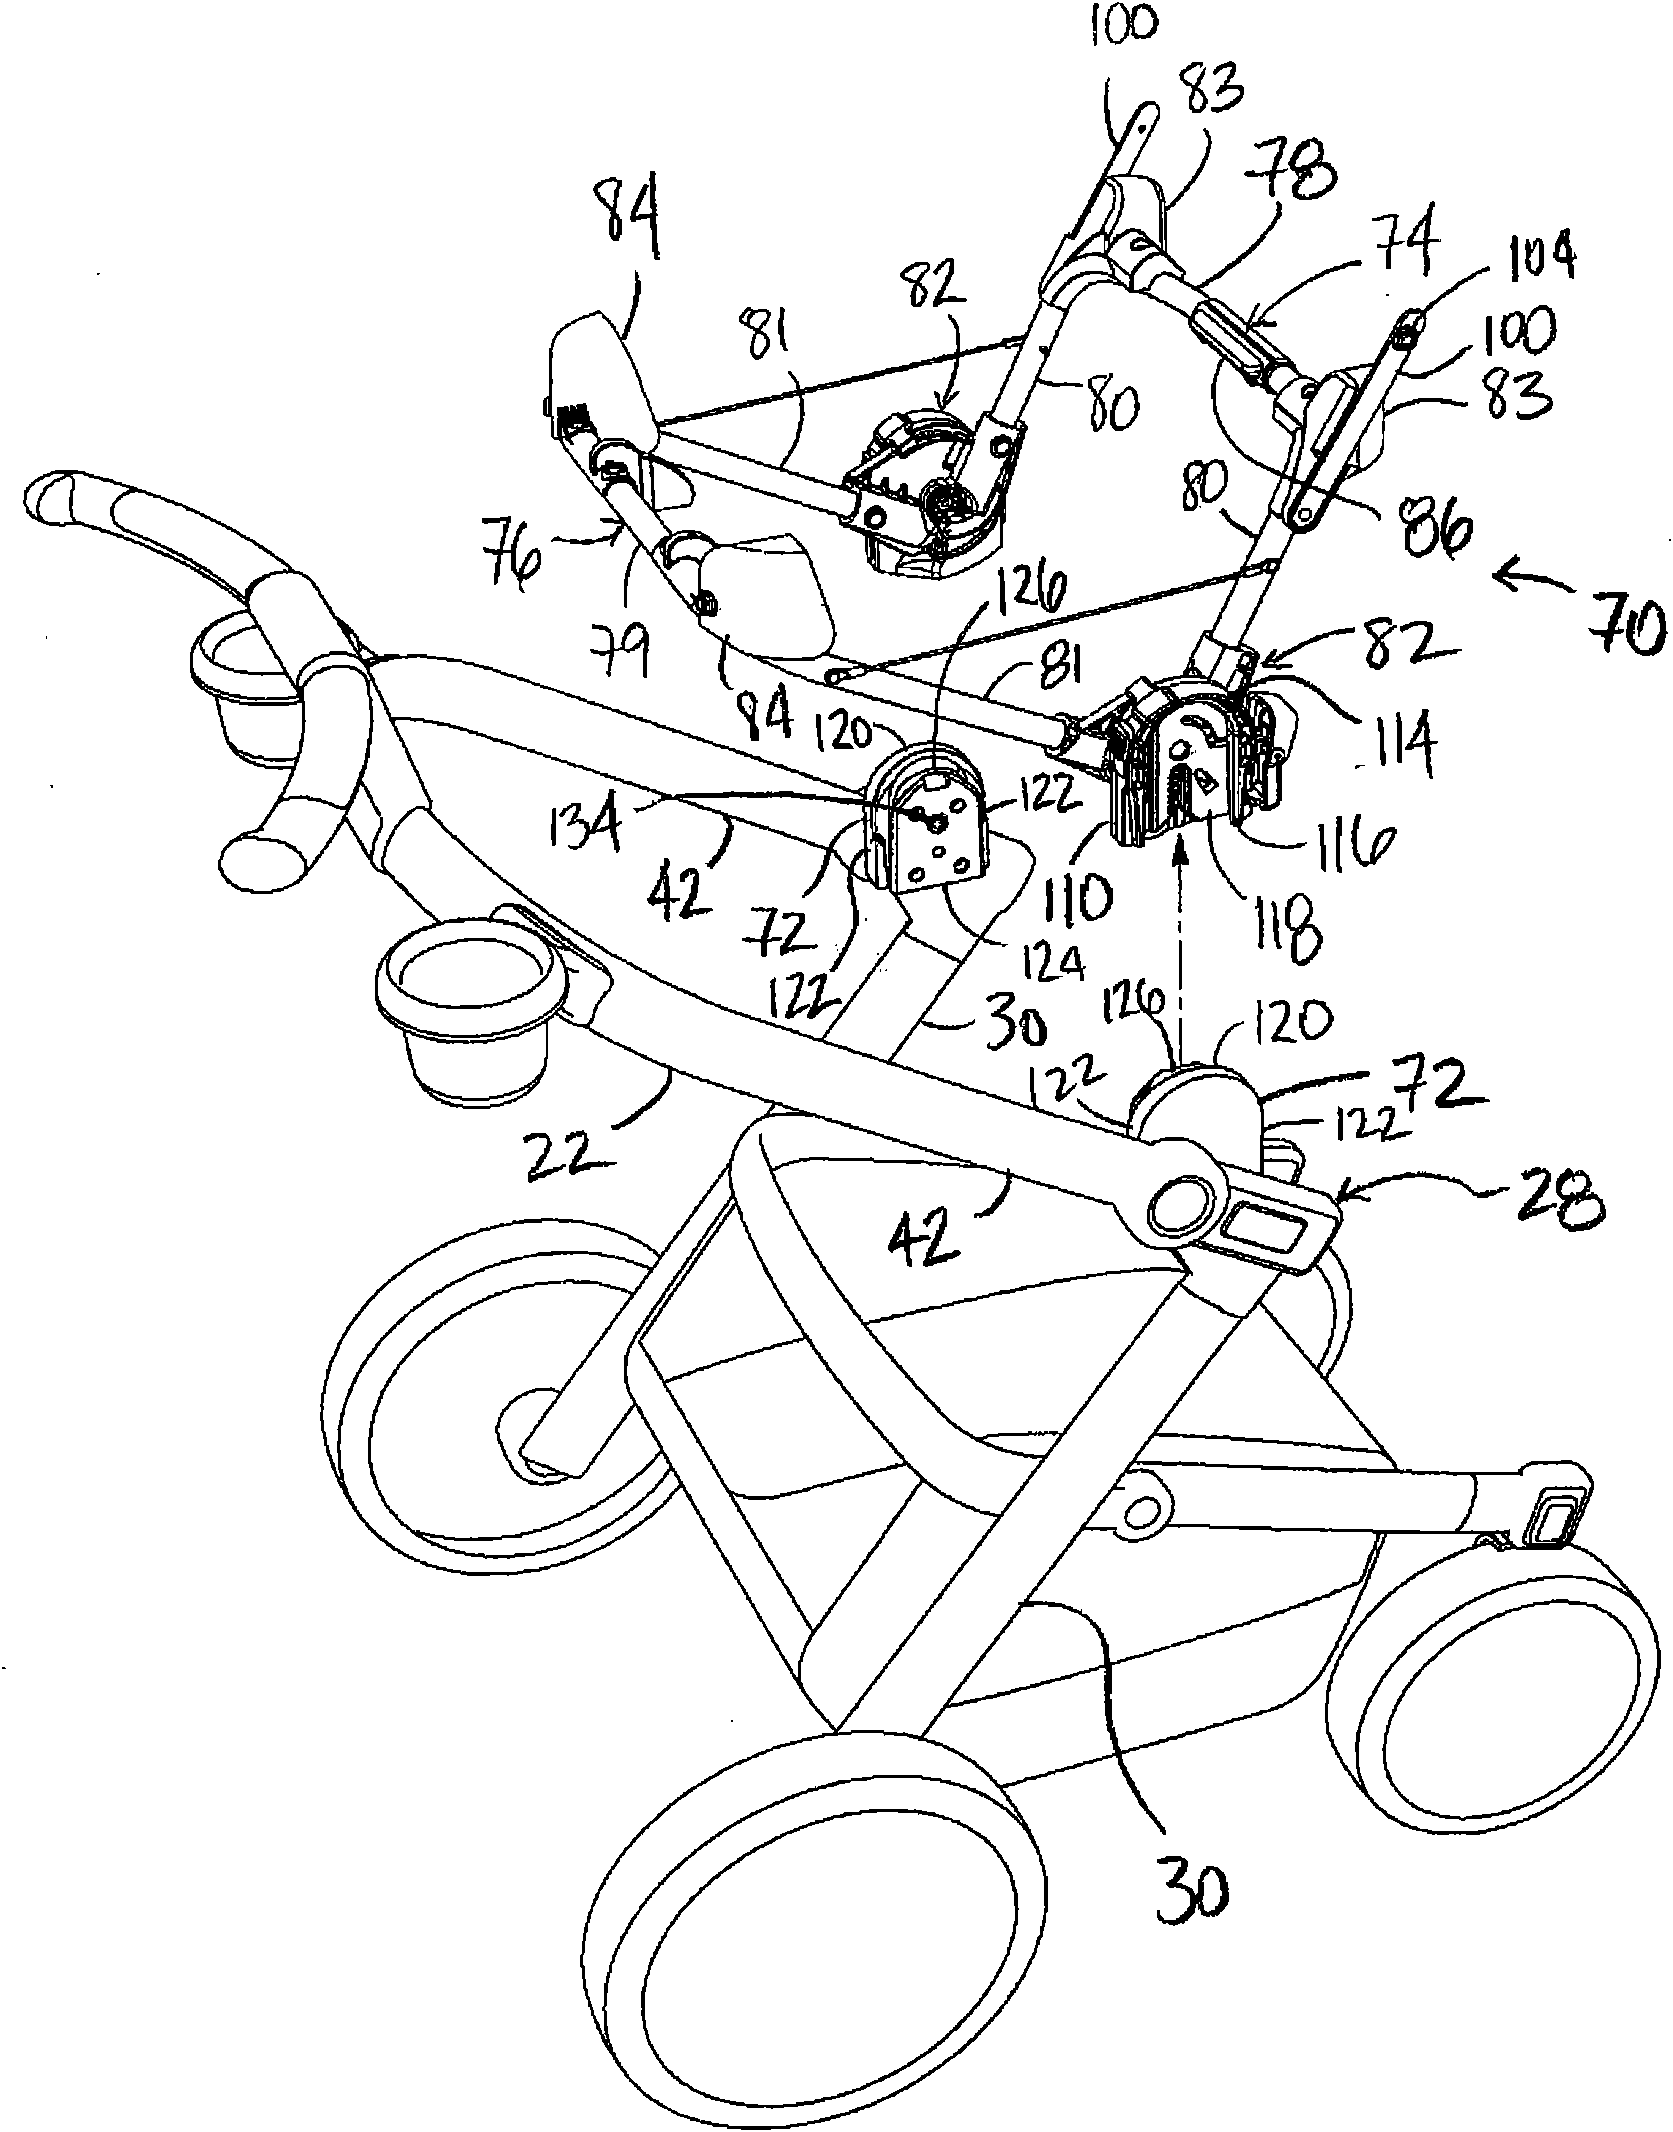 Stroller adapter for an infant car seat